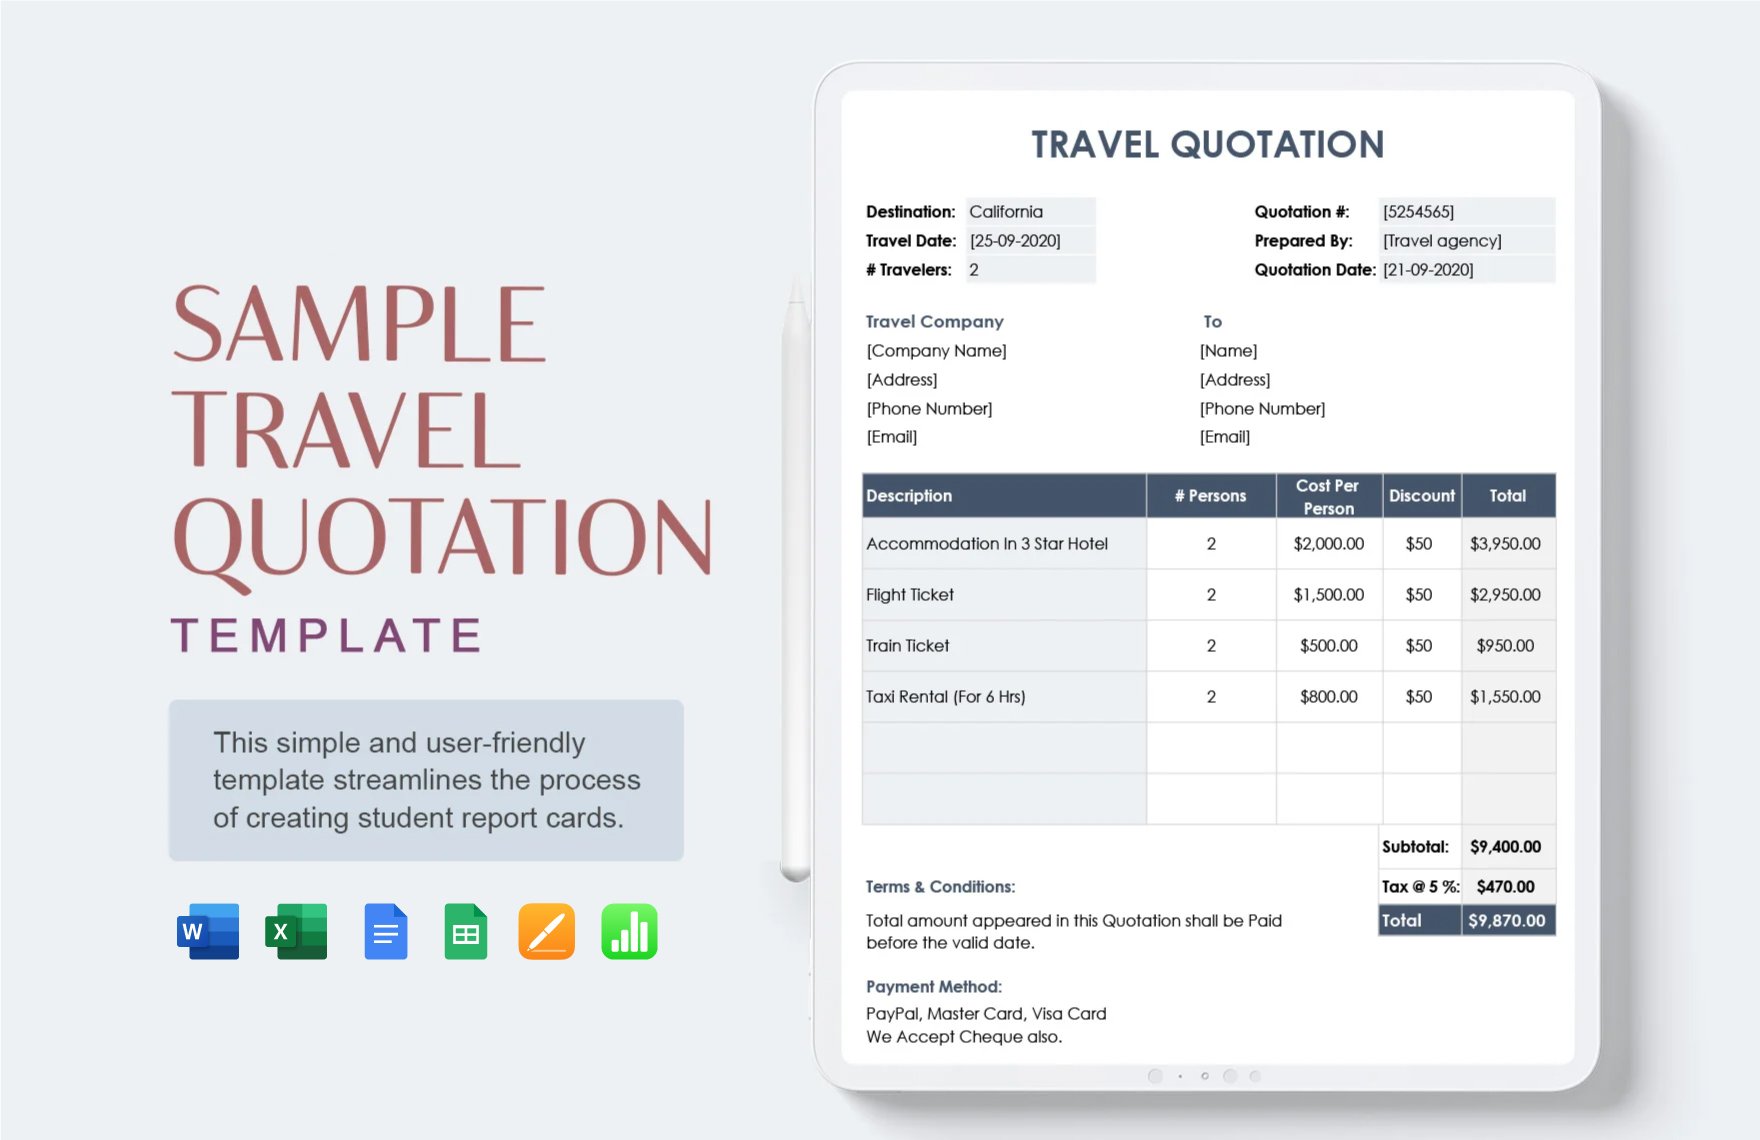 Sample Travel Quotation Template